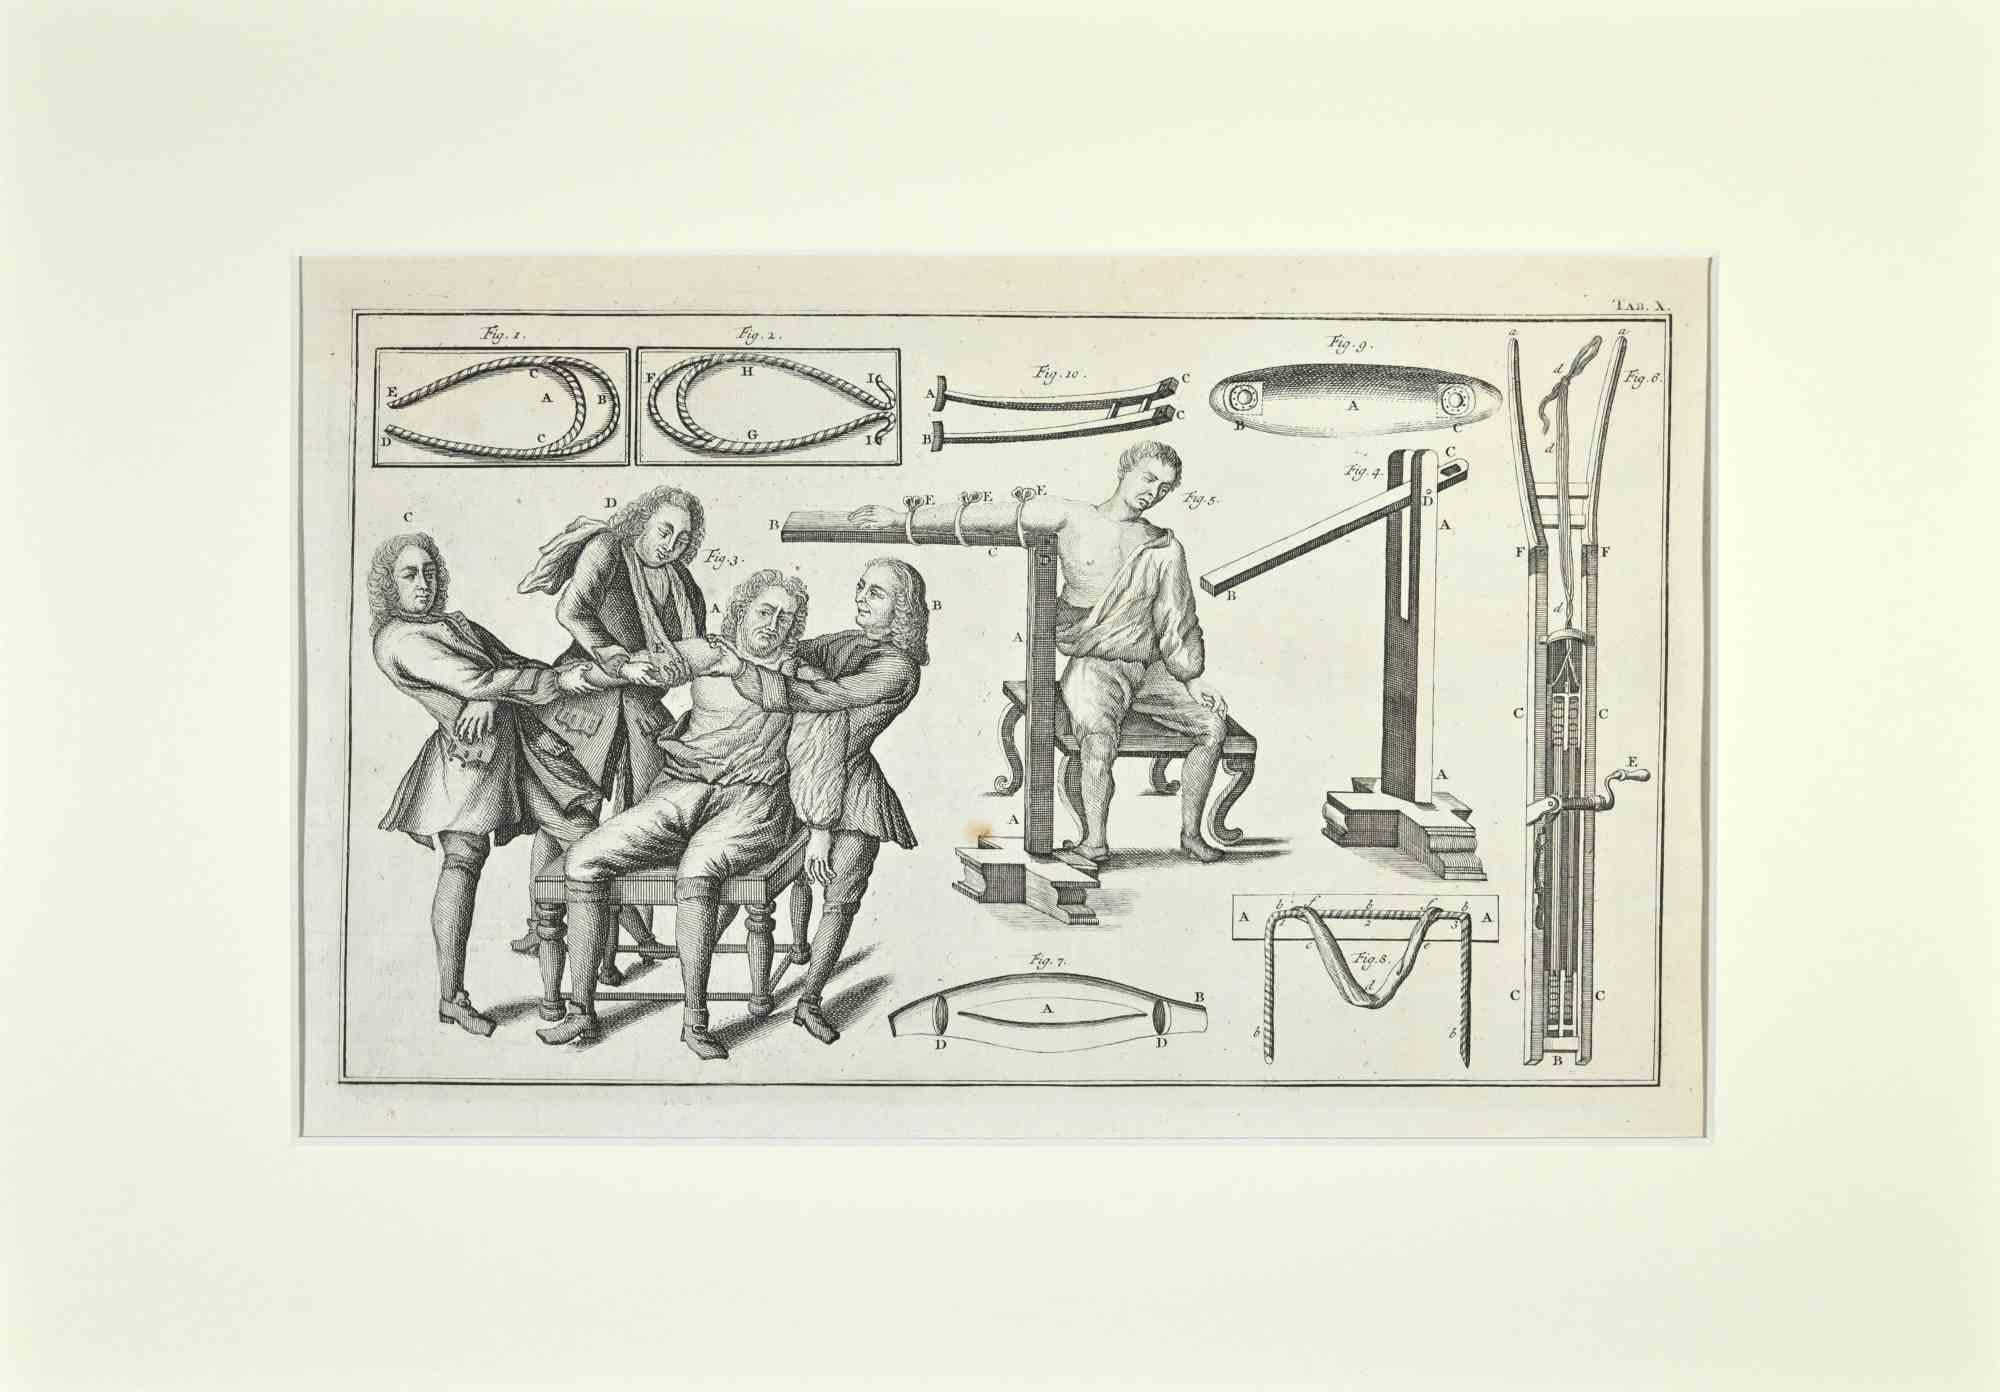 Surgical Instruments and Treatements is part of the suite realized by Lorenz Heister in the series of Institutiones Chirurgicae, Amsterdam, Janssonius-Waesberg, 1750.

Etching on paper.

The work belongs to the Latin edition of the famous work by